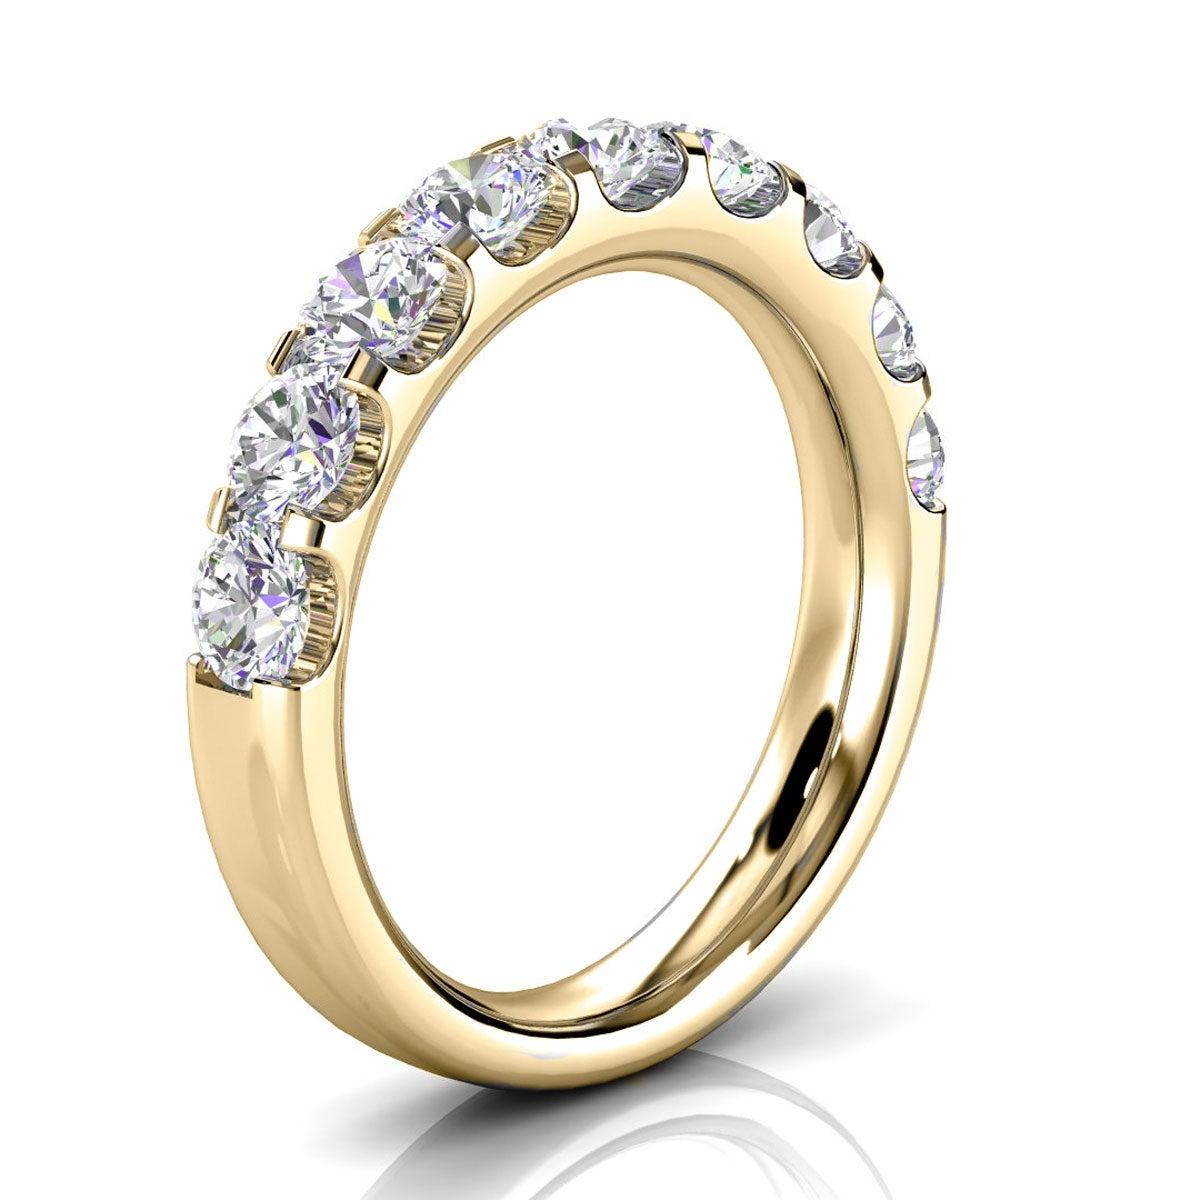 For Sale:  14k Yellow Gold Valerie Micro-Prong Diamond Ring '1 1/2 Ct. Tw' 2